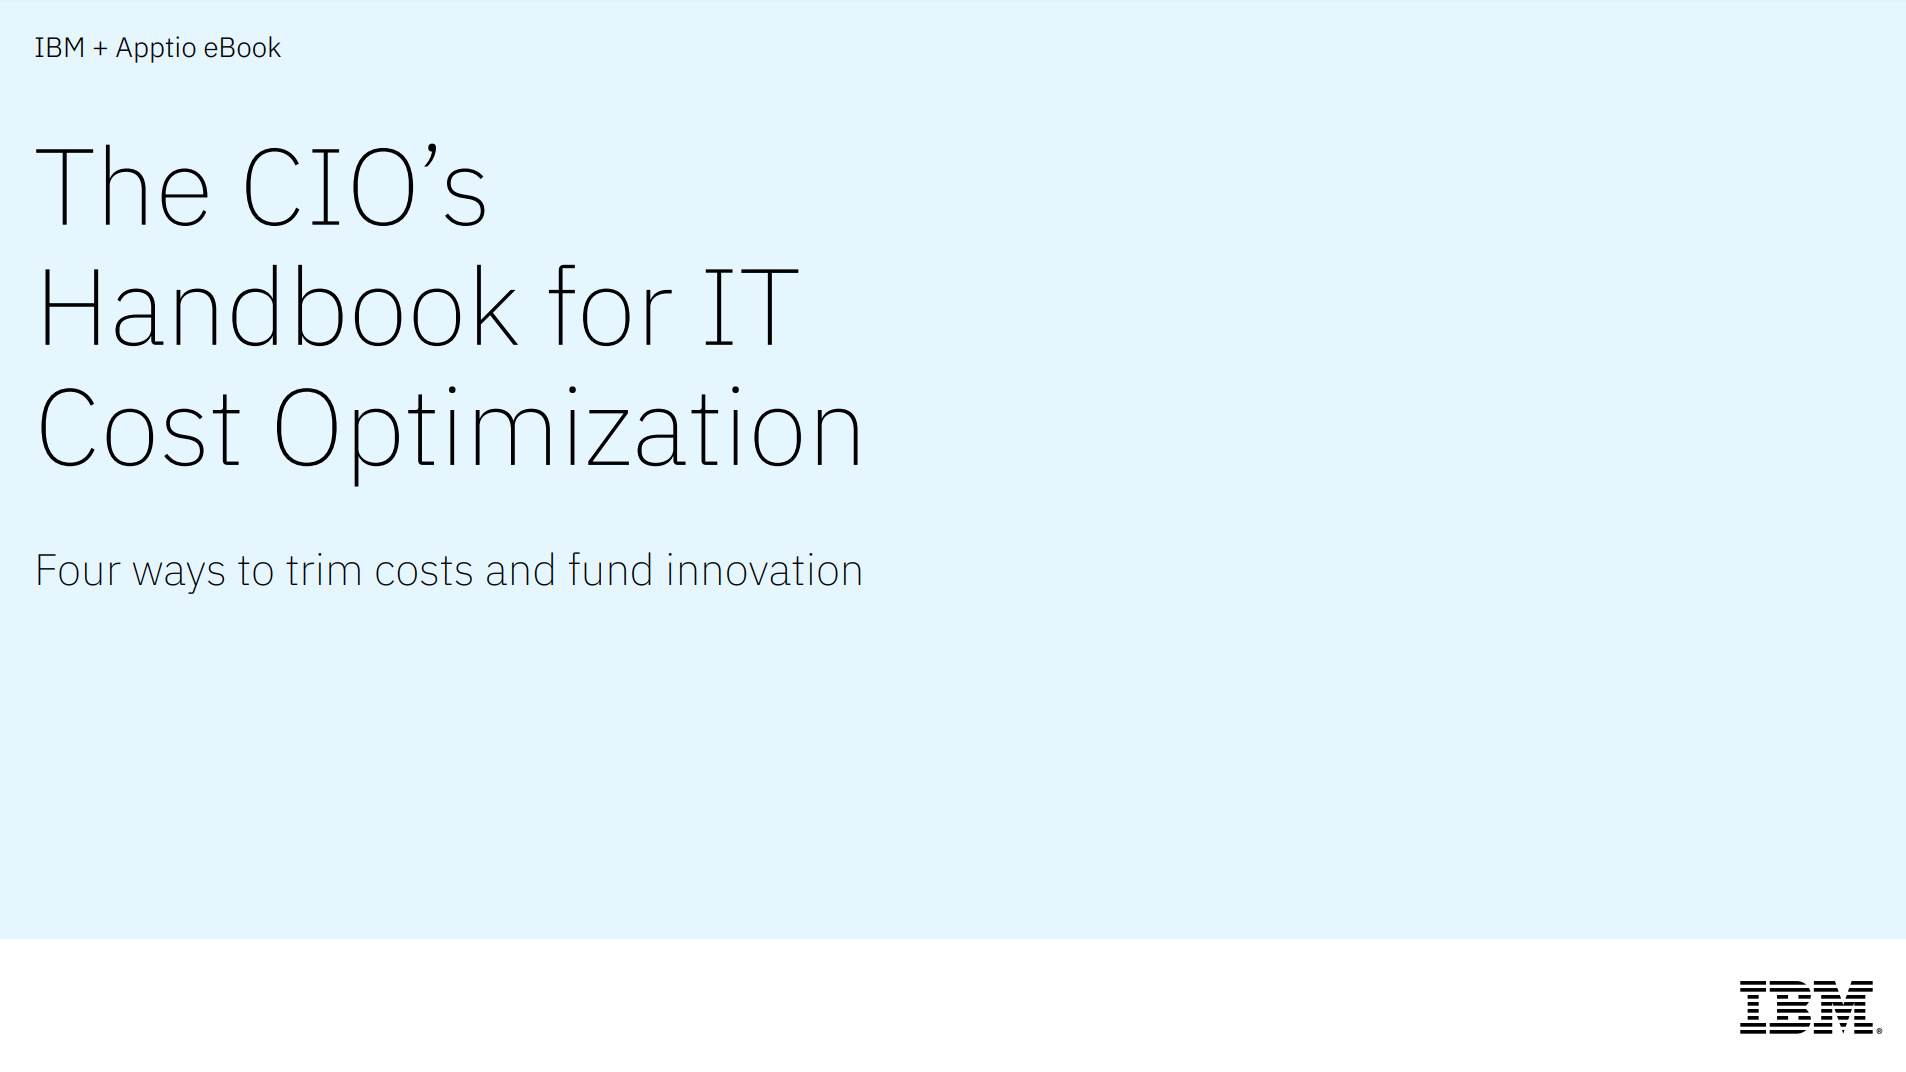 An IBM eBook with four ways for cost optimization and innovation